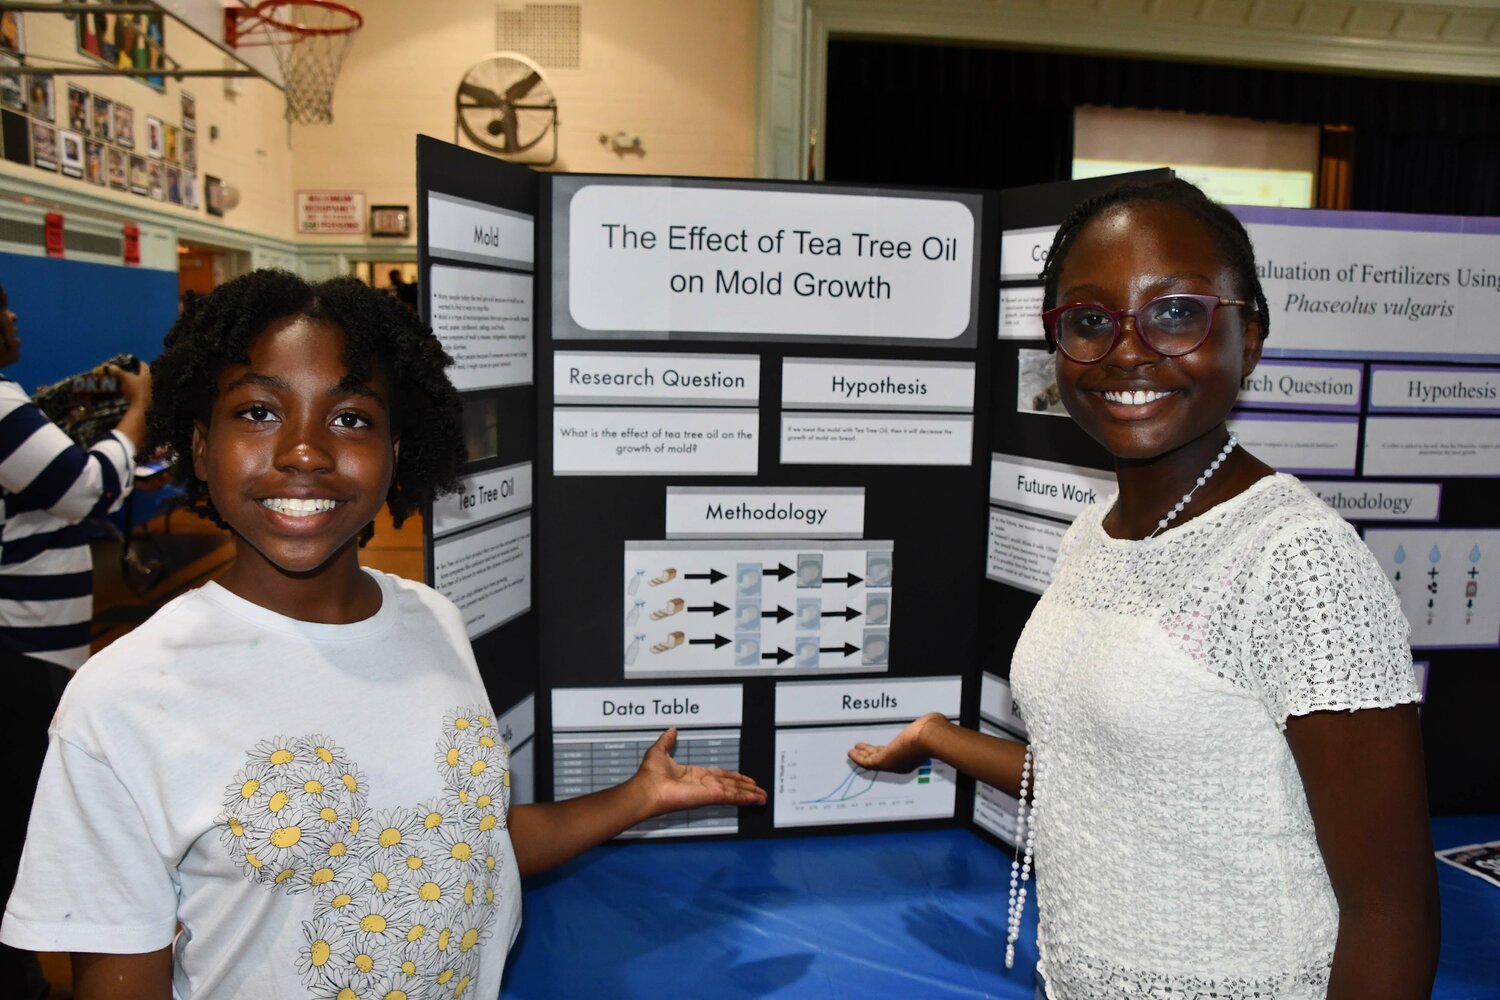 Elmont students present science research projects at symposium in Herald Community Newspapers